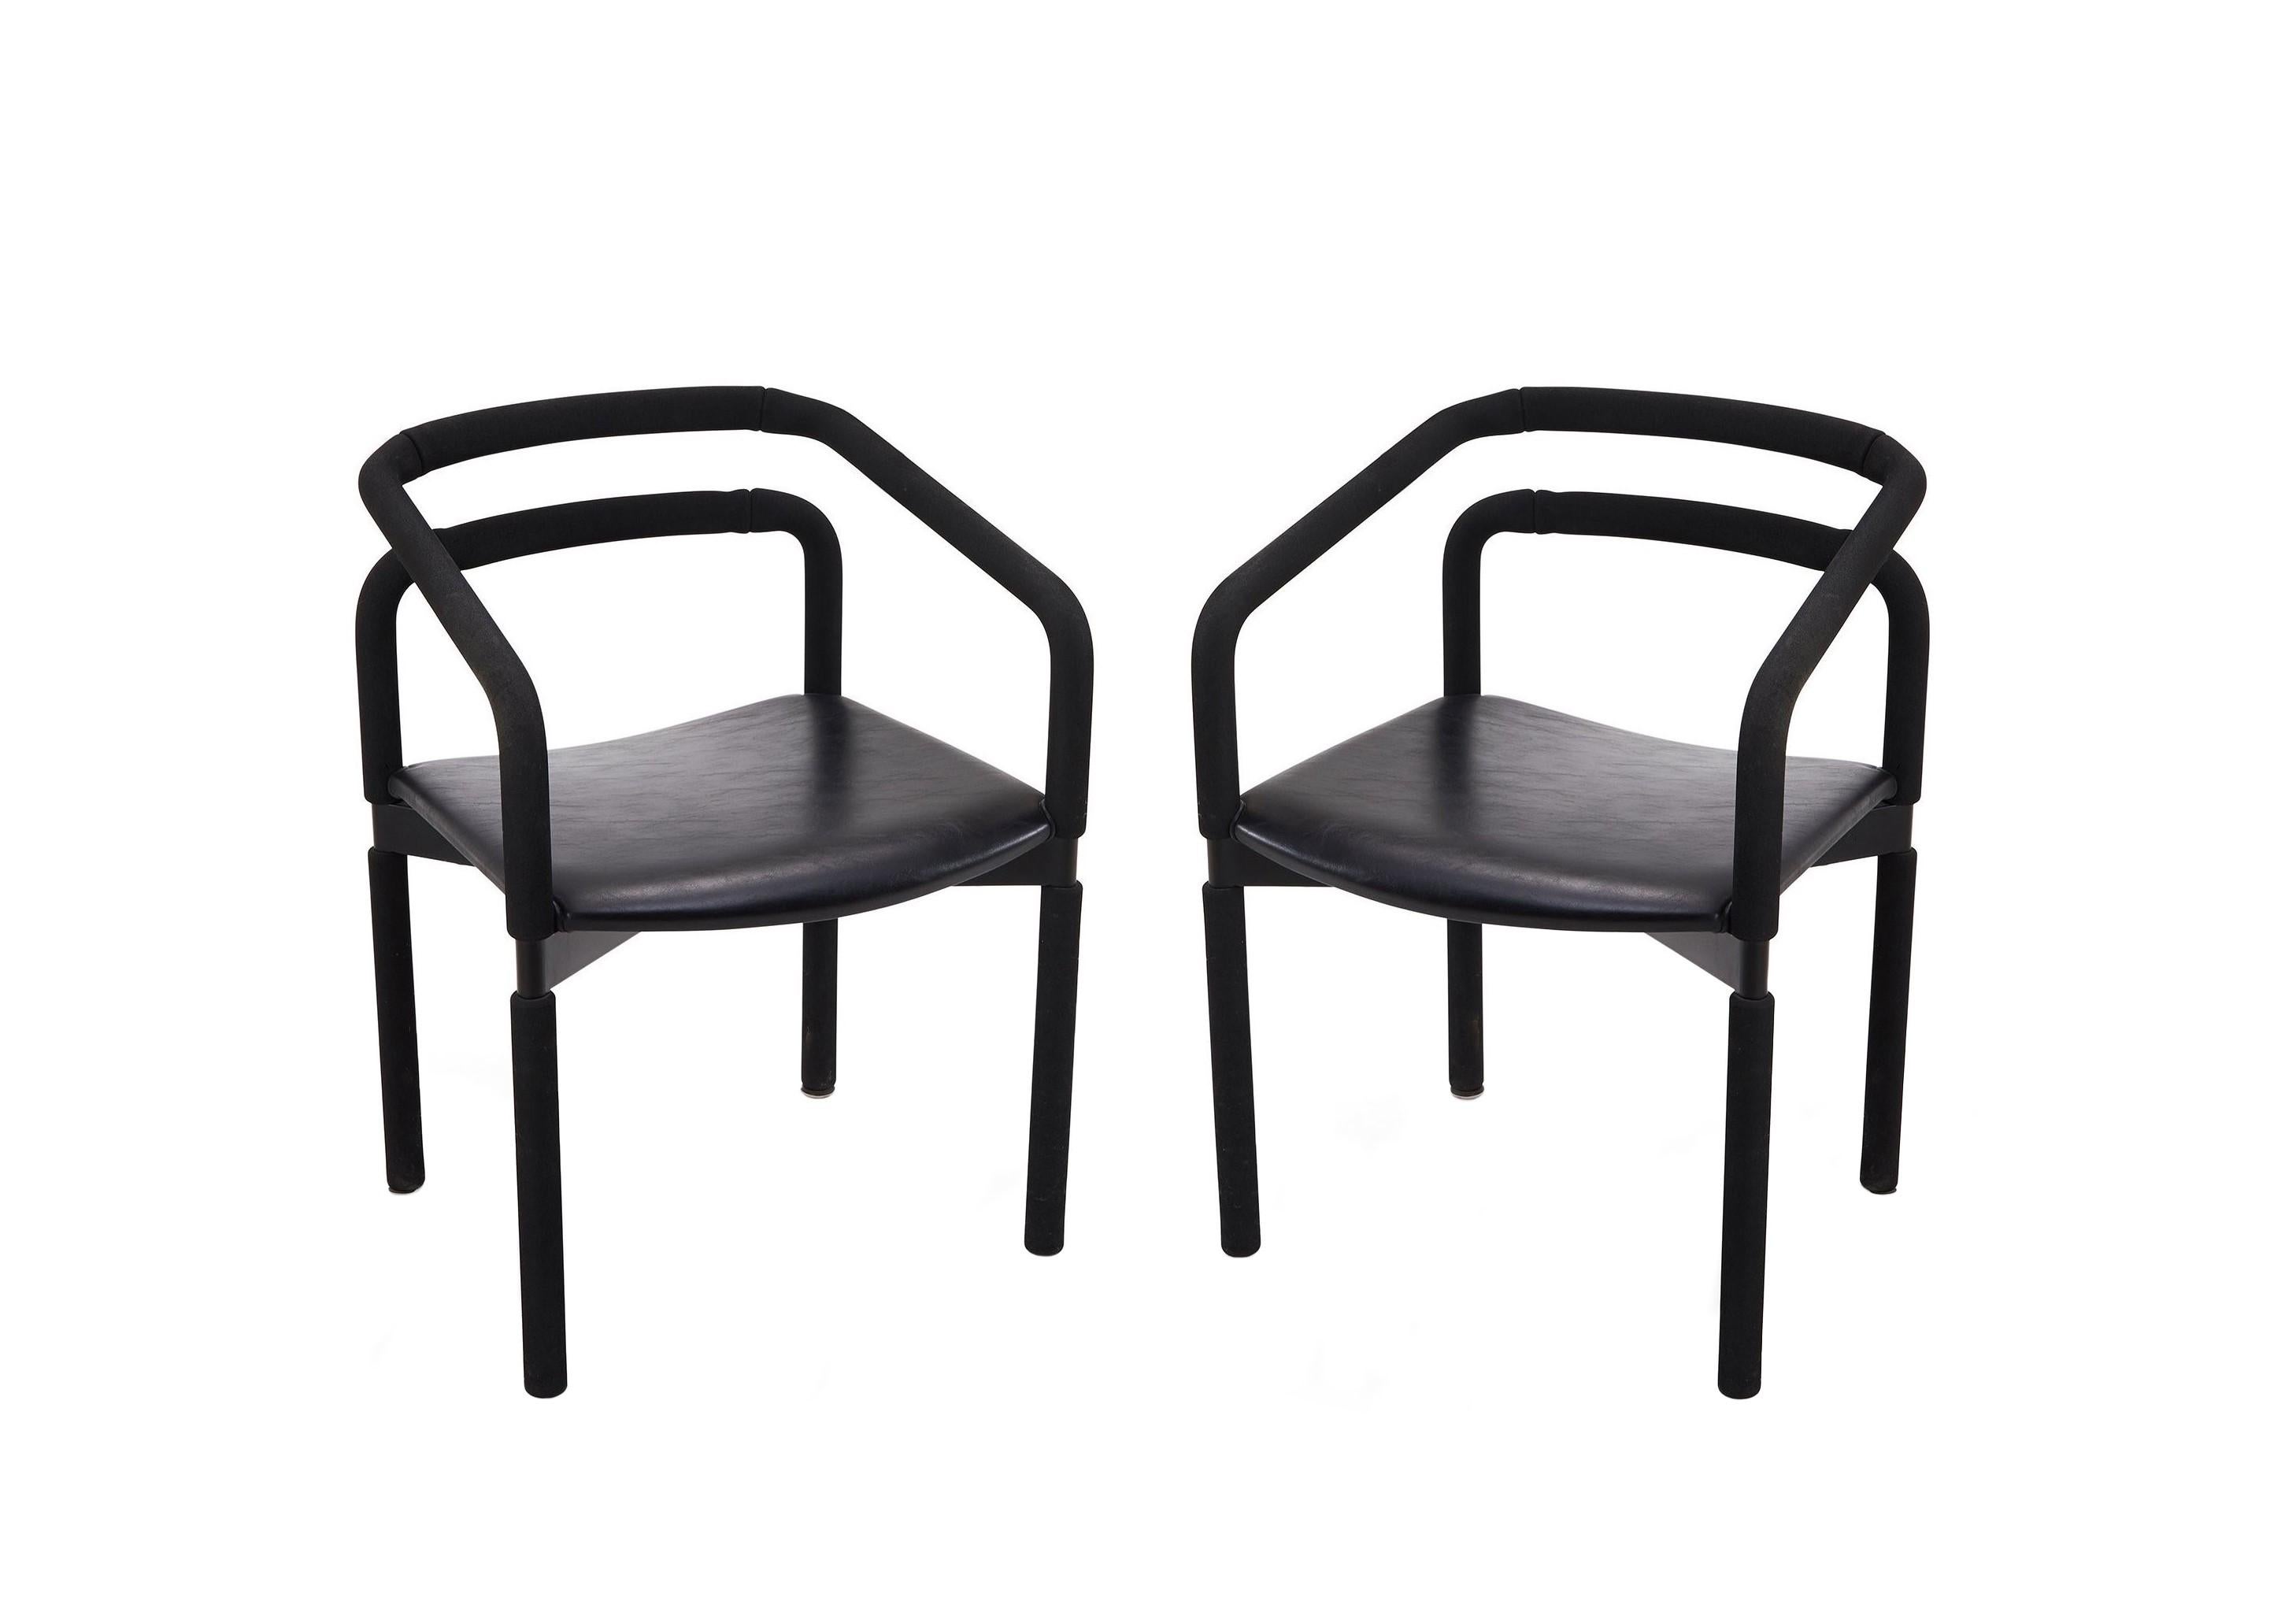 Fabulous set of six bold black armchairs by Metro for Steelcase designed by Brian Kane. These sleek vintage chairs are made of black steel encased in EPDM rubber tubing with comfortable black leather seats and offer a satisfying grip. In good ready